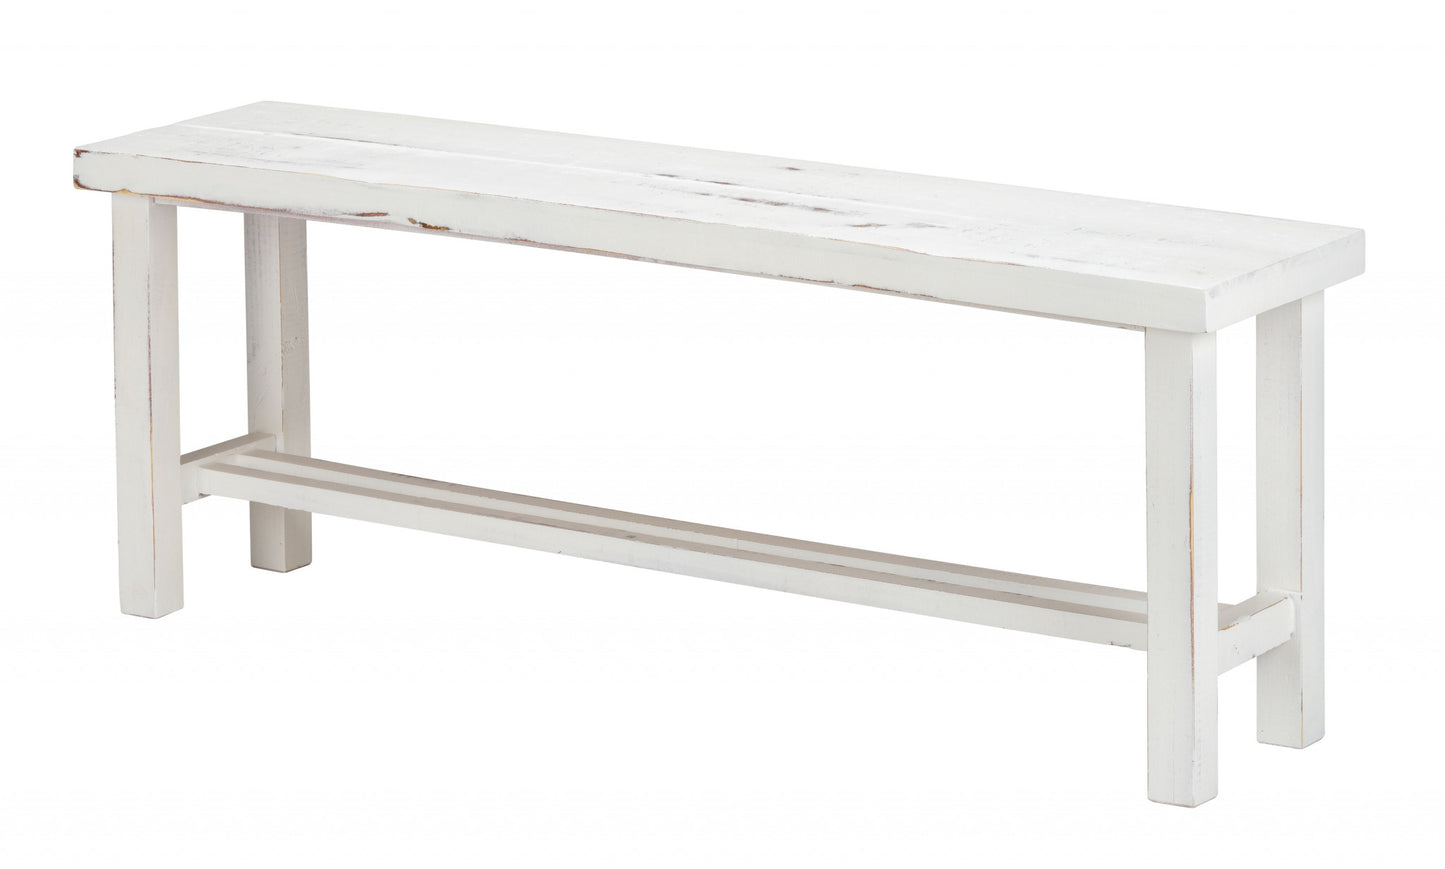 48" Rustic White Distressed Bench By Homeroots